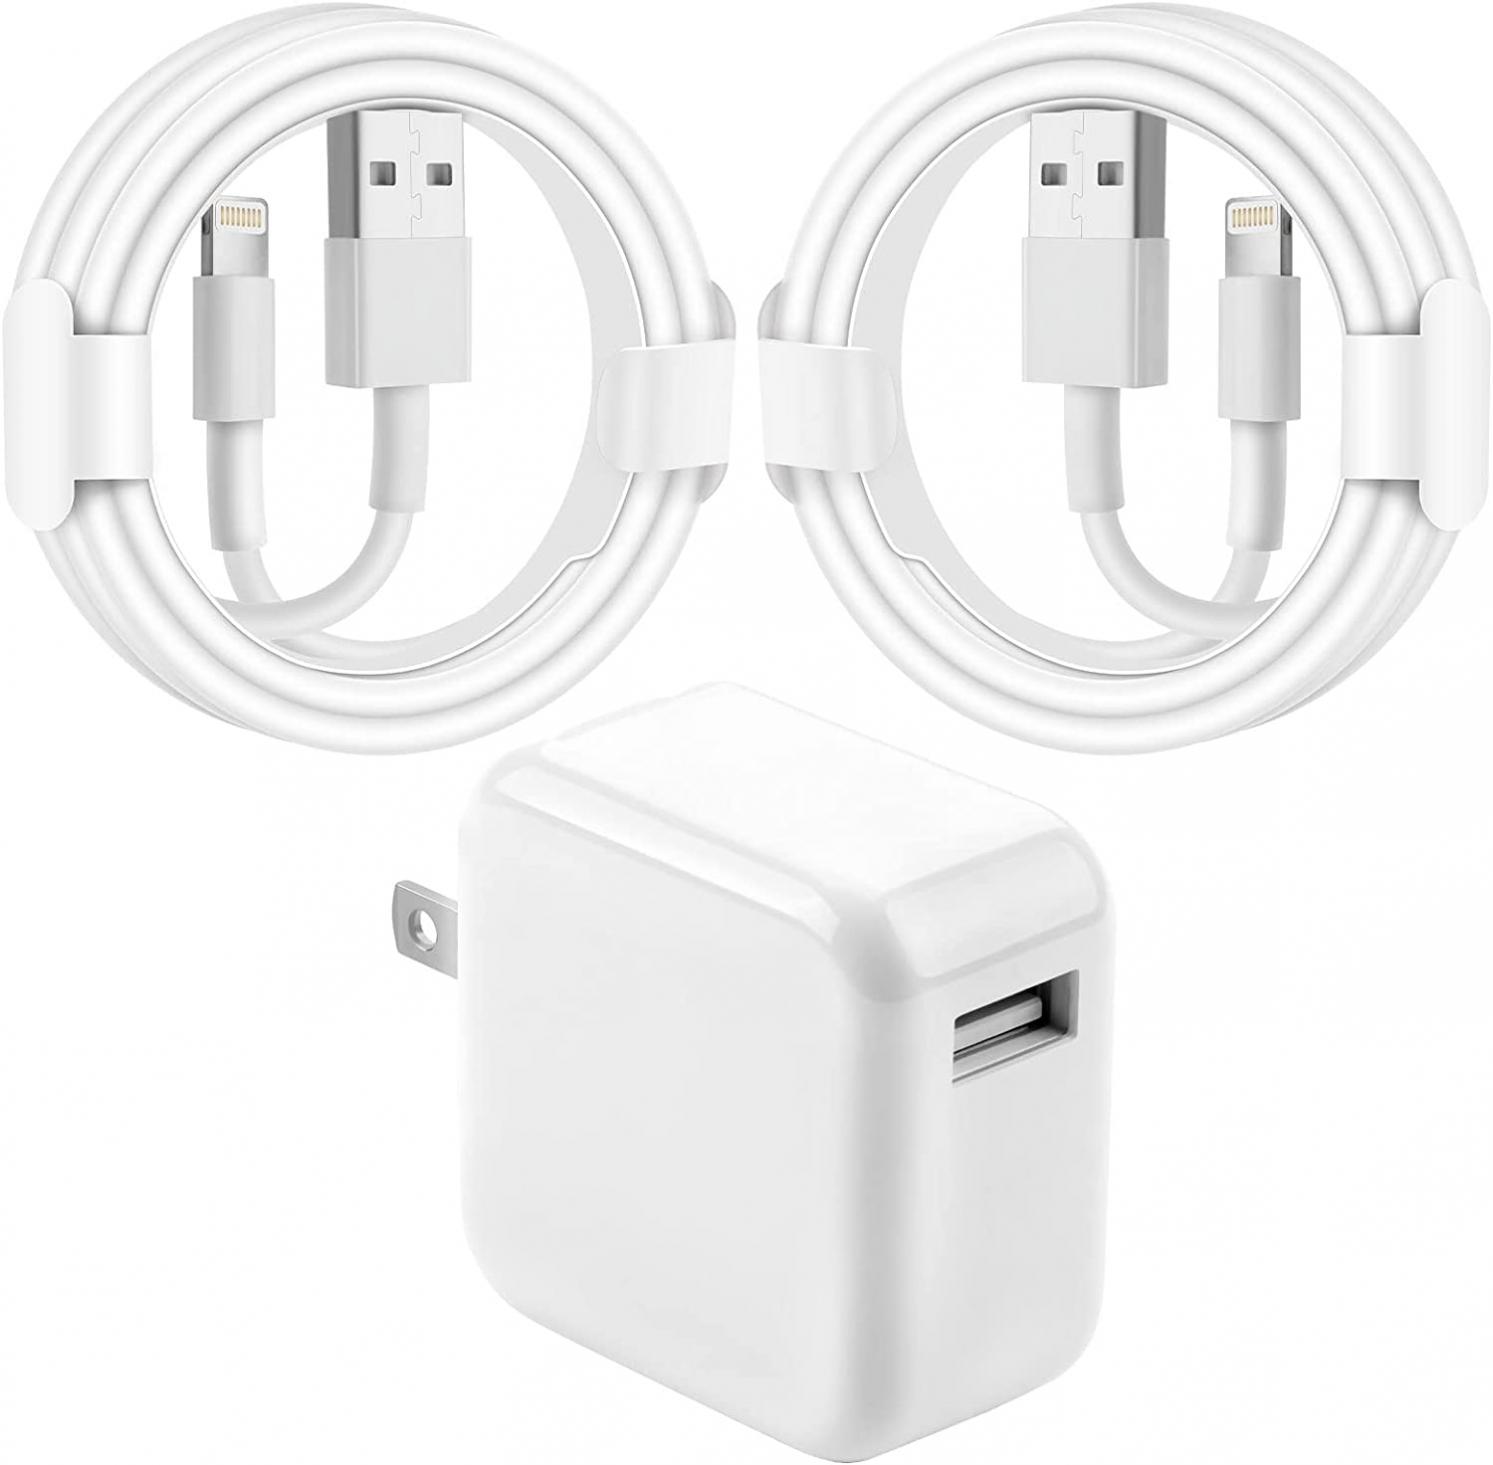 iPad Charger iPhone Charger,【Apple MFi Certified】 12W Fast Charging USB Wall Charger Block Foldable Portable Travel Plug and 2 Pack Lightning Cable Compatible with iPhone,iPad,iPad Mini,Air